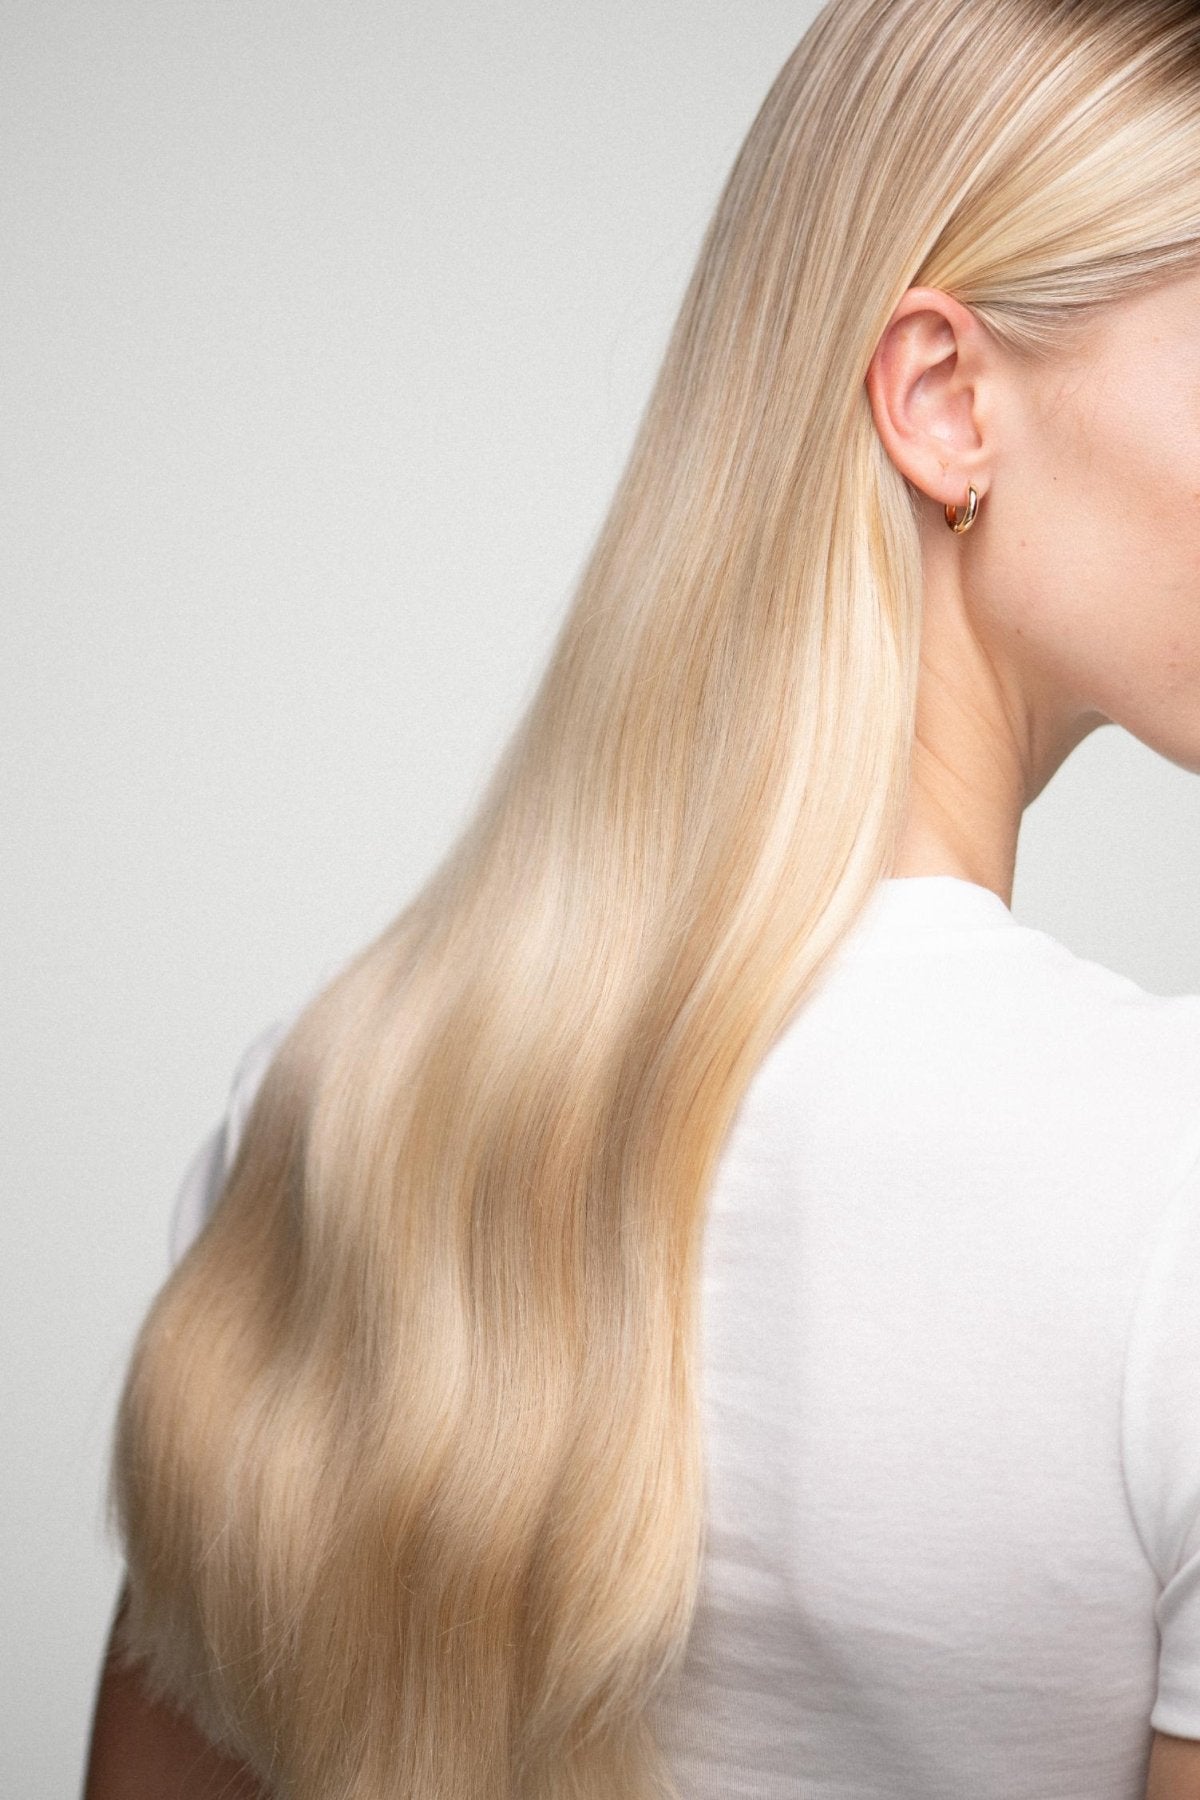 10 Tips On How To Stimulate Hair Growth - UKLASH